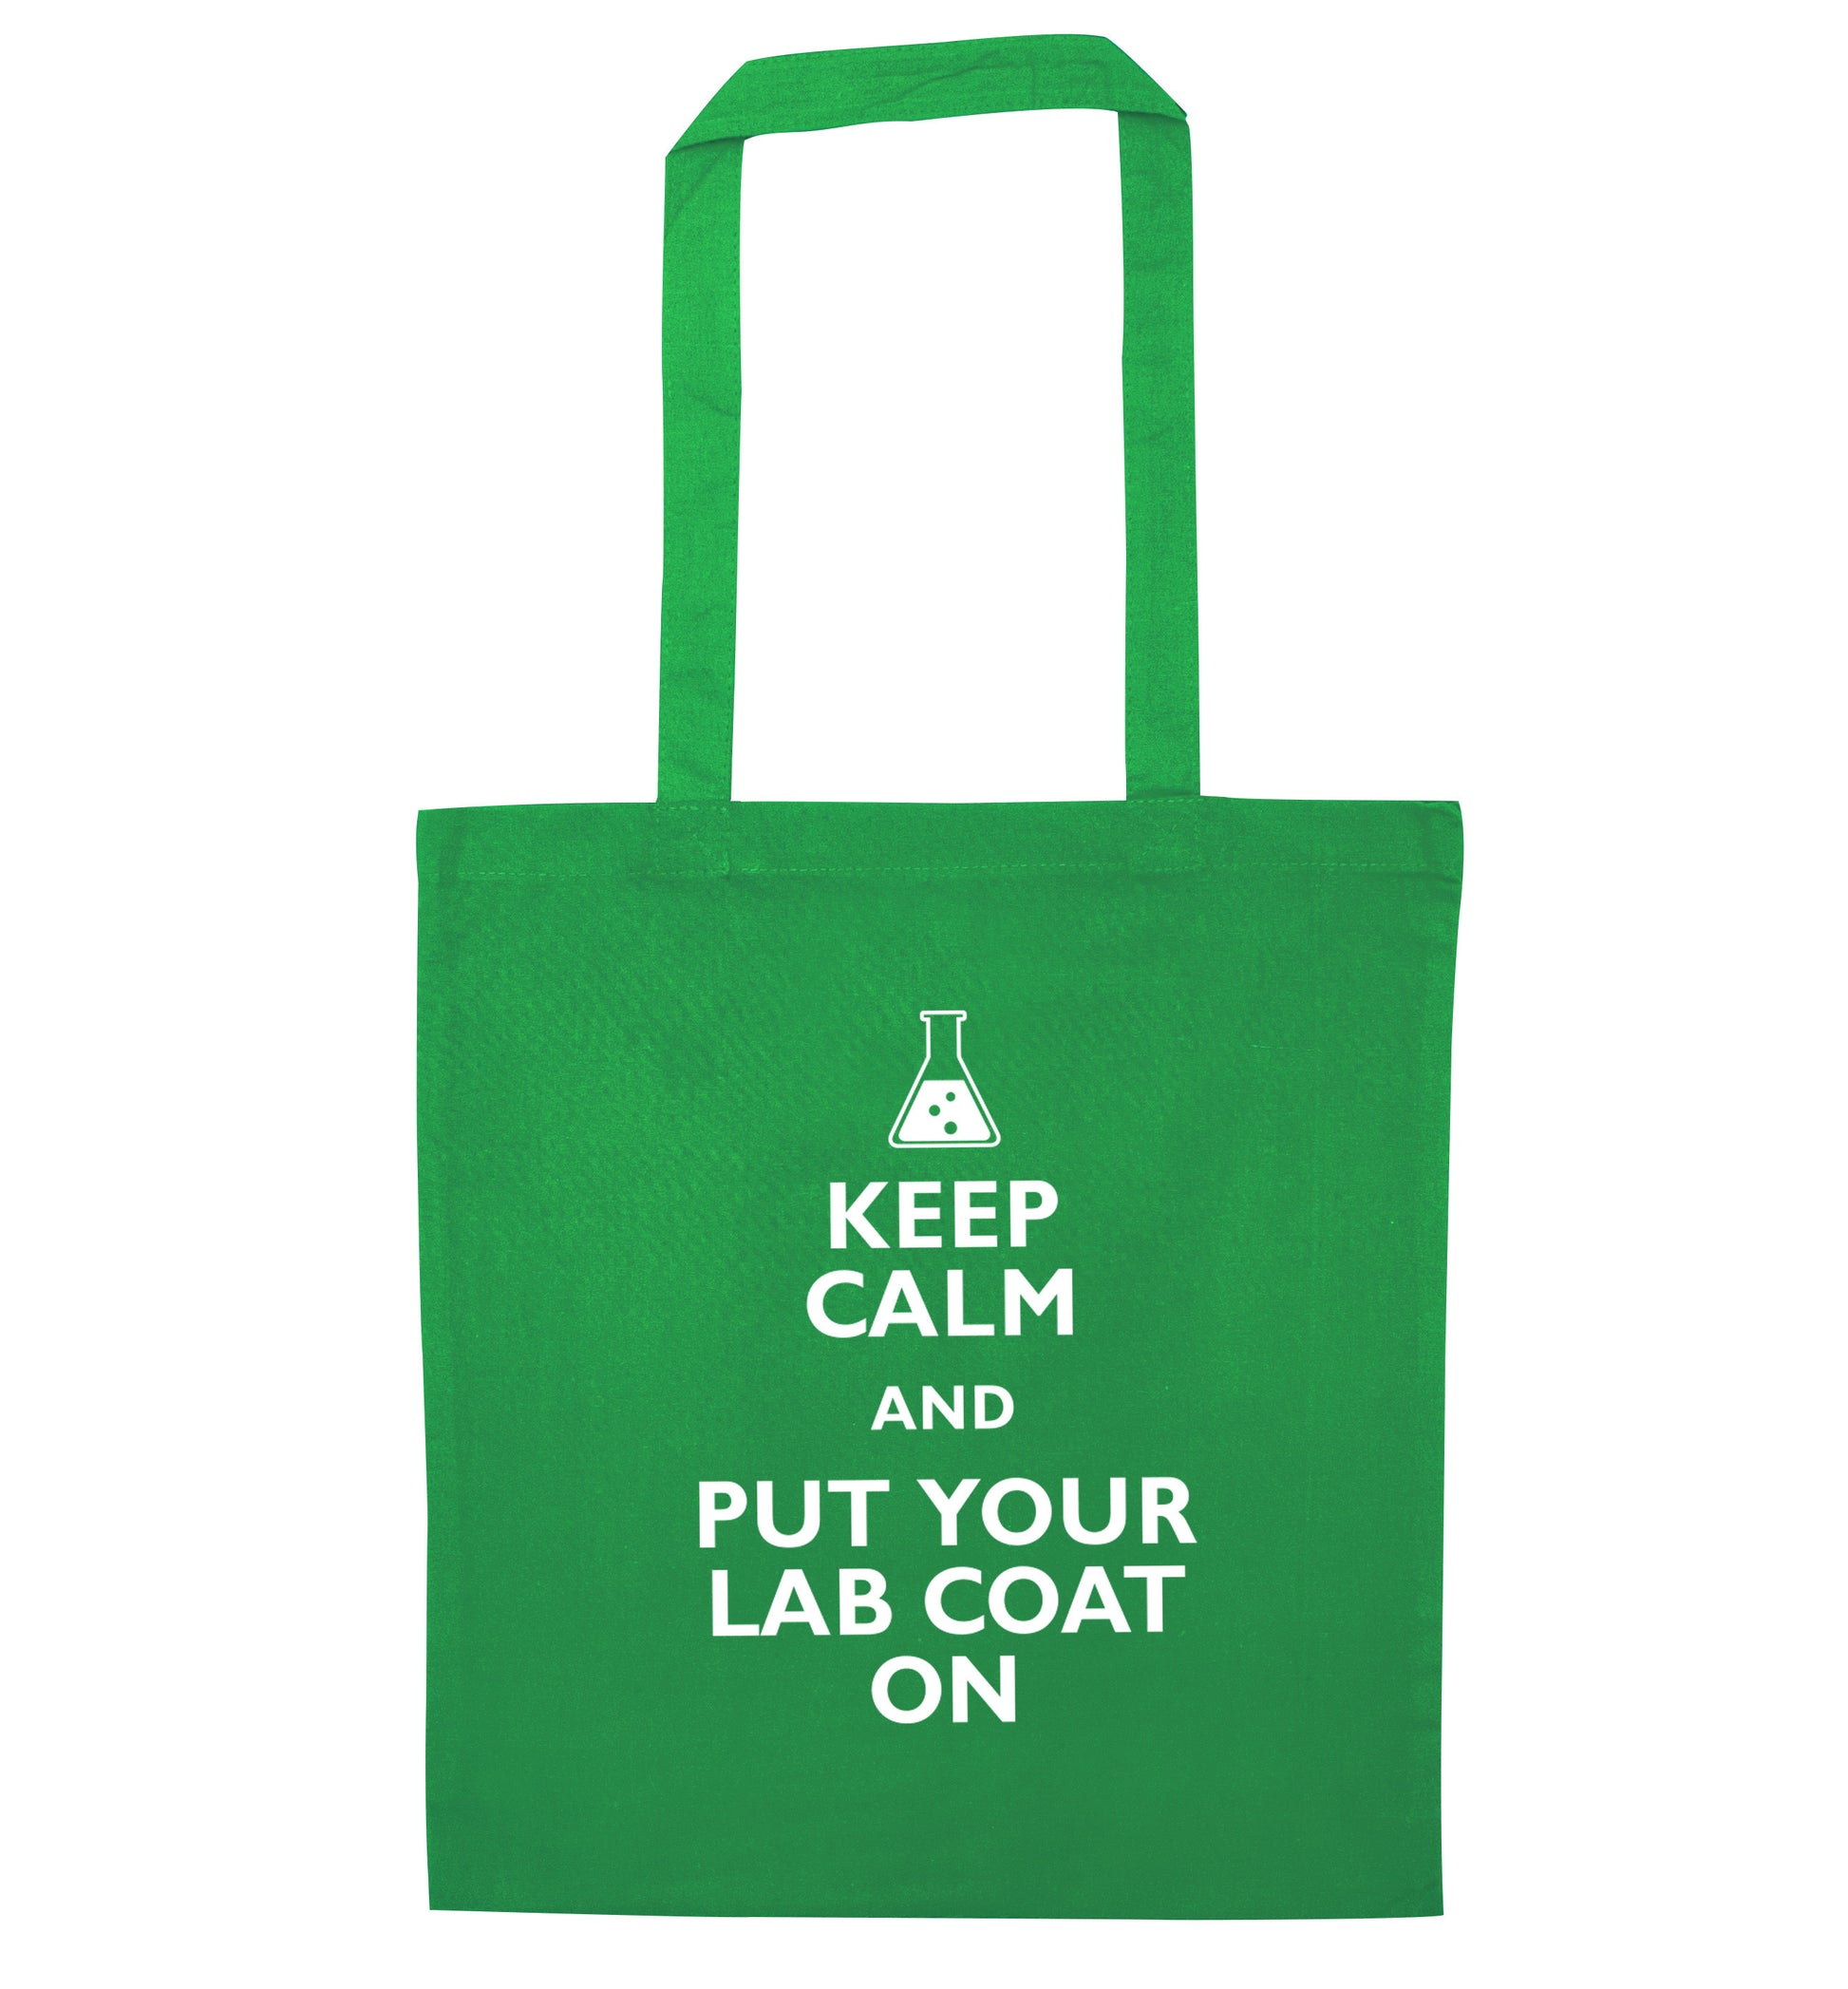 Keep calm and put your lab coat on green tote bag